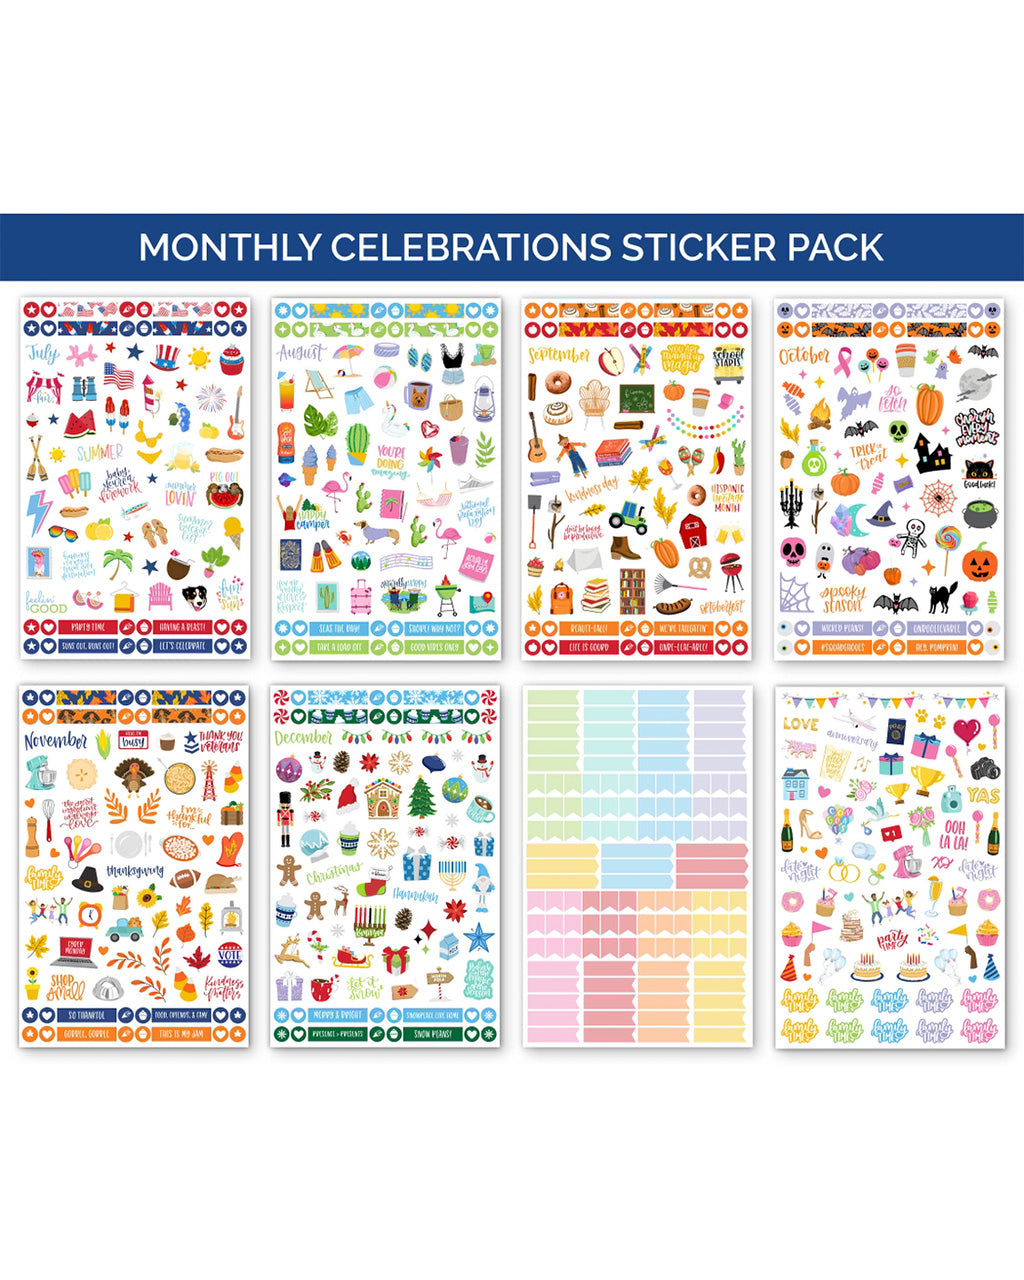 Sticker Pack - Monthly Celebrations – ban.do